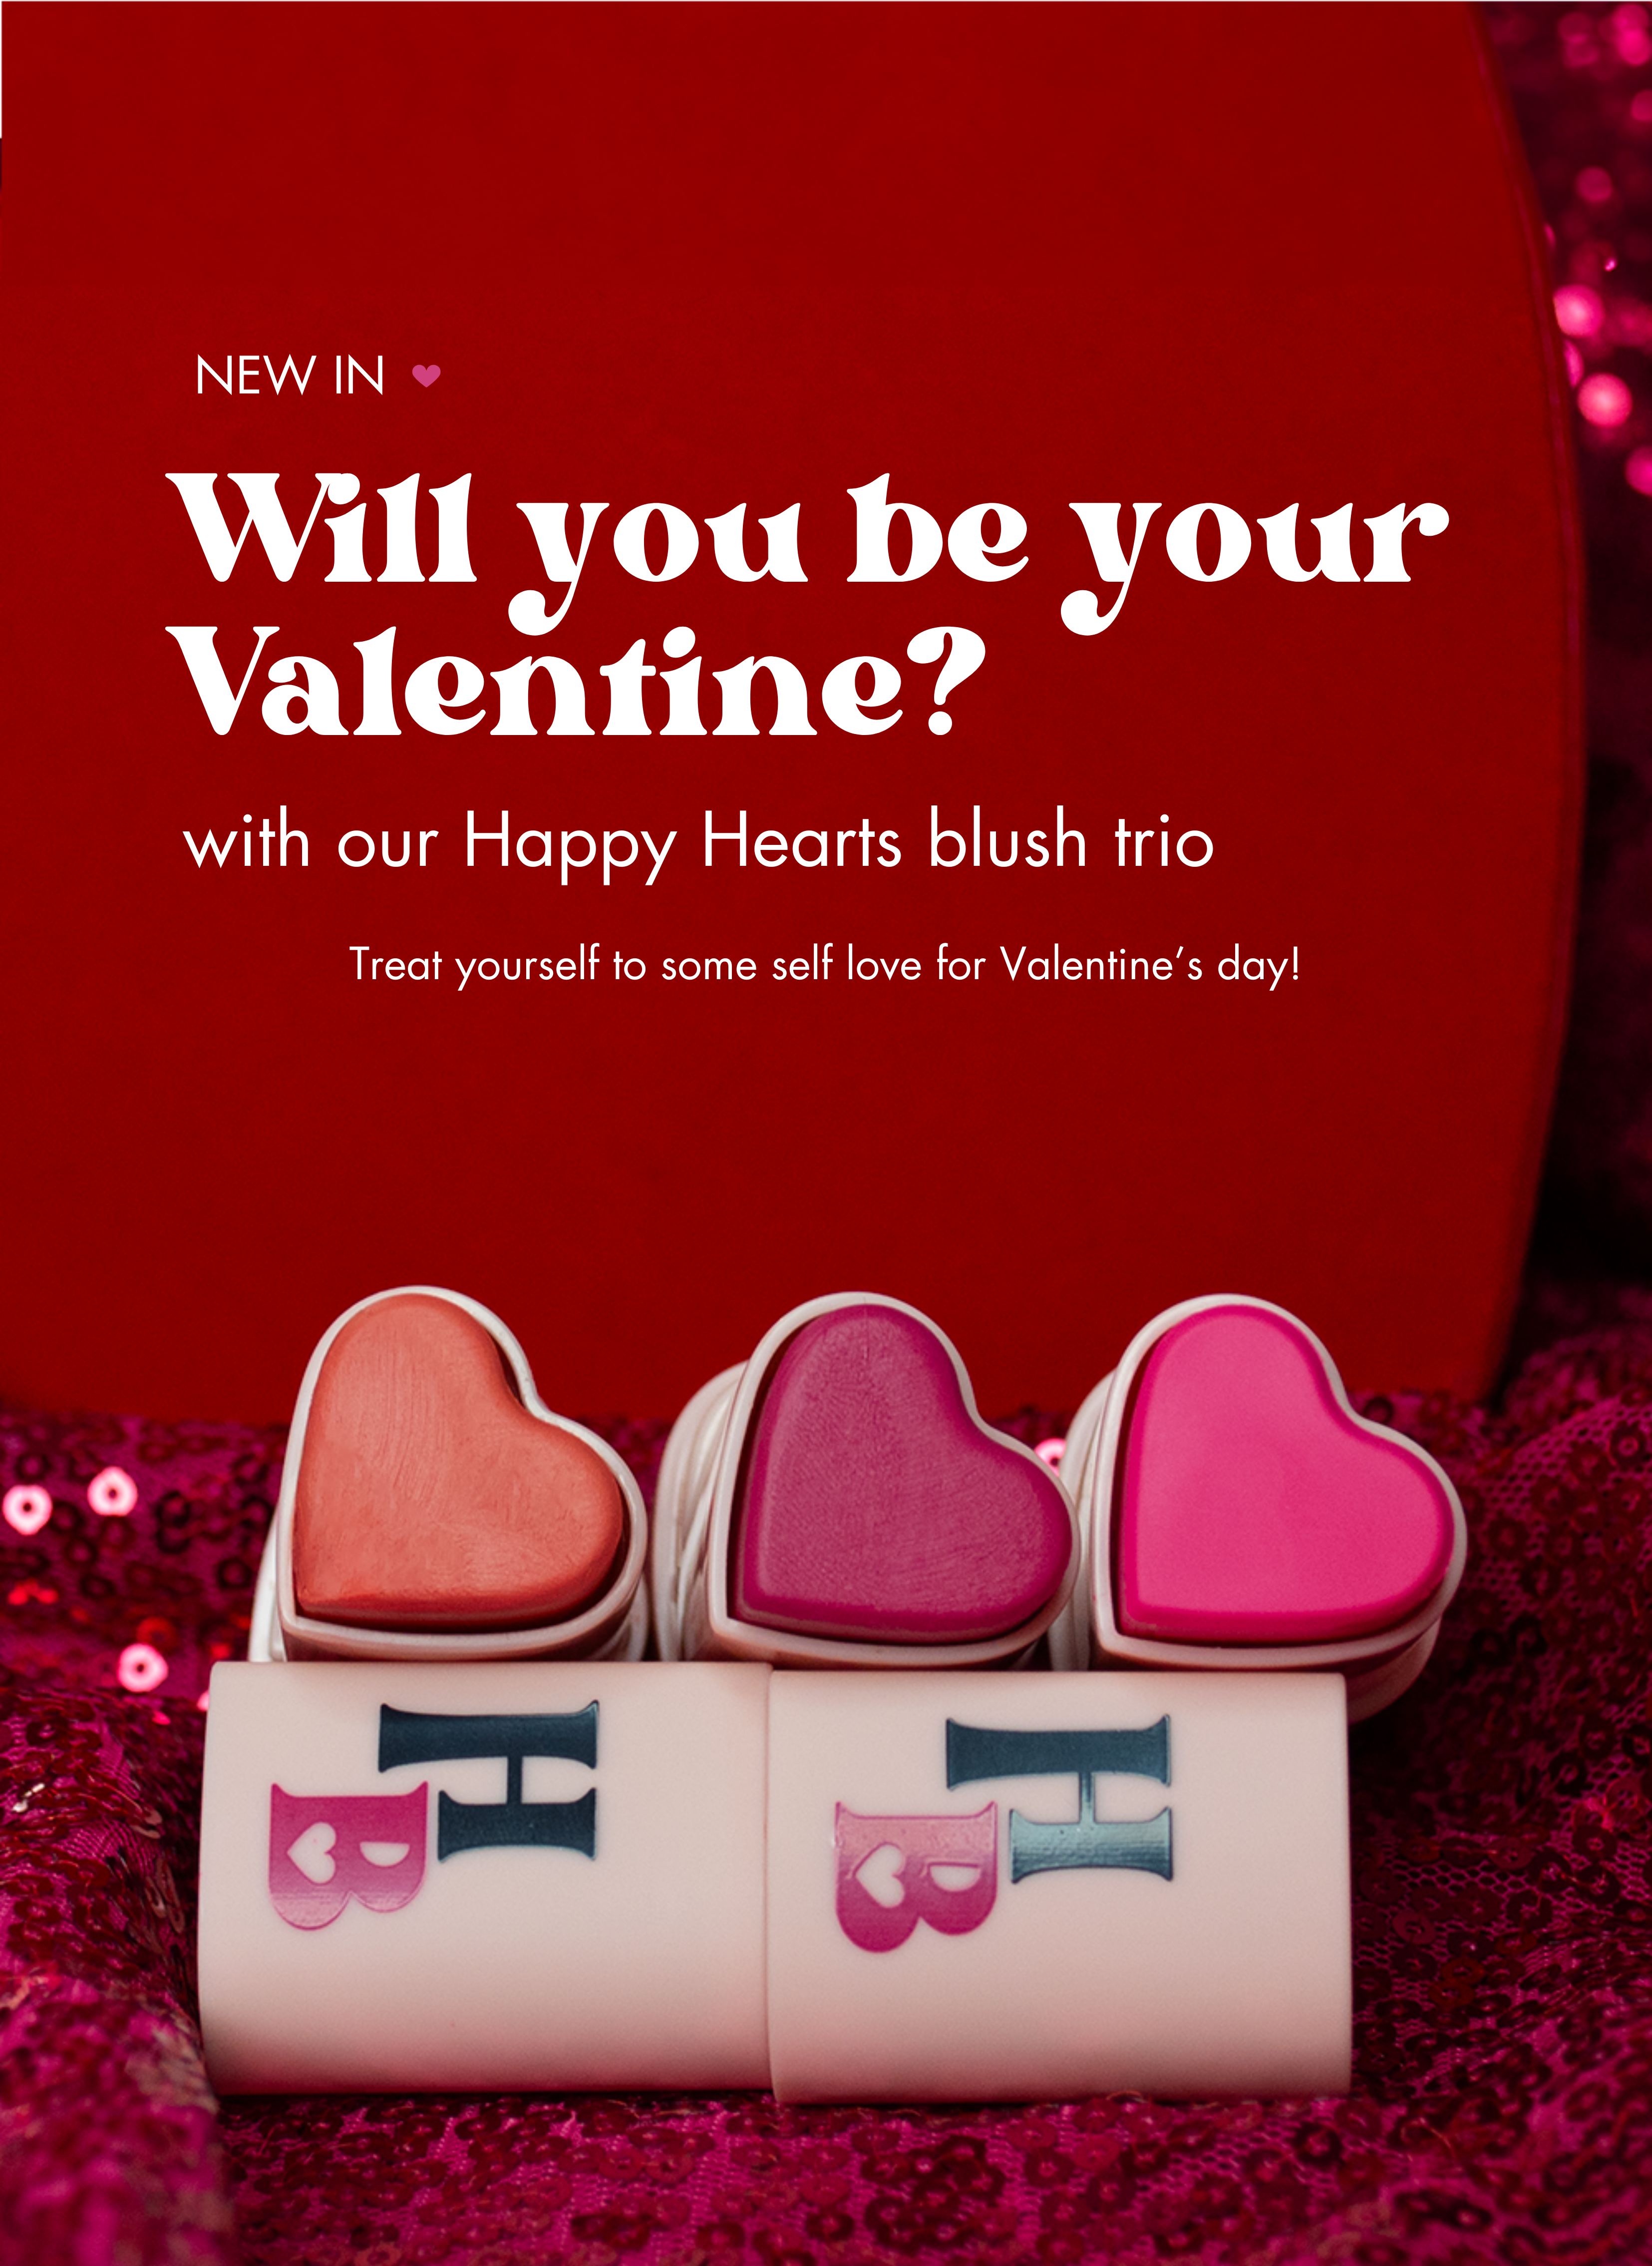 will you be your valentine? with our Happy Hearts blush trio - treat yourself to some self love for Valentines Day!